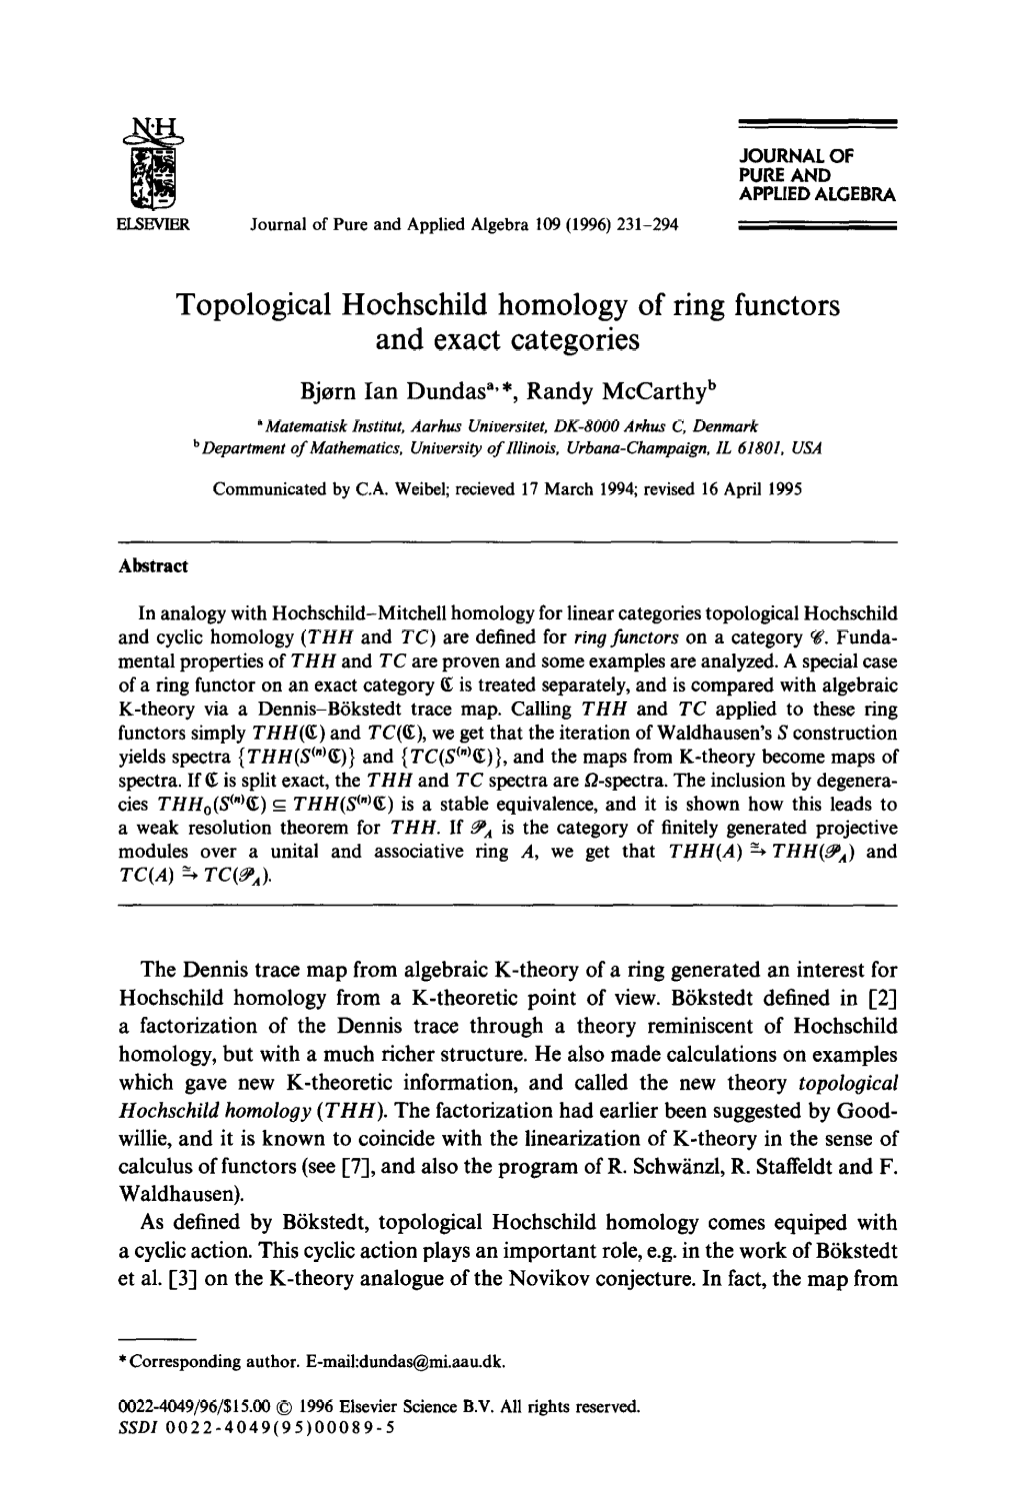 Topological Hochschild Homology of Ring Functors and Exact Categories